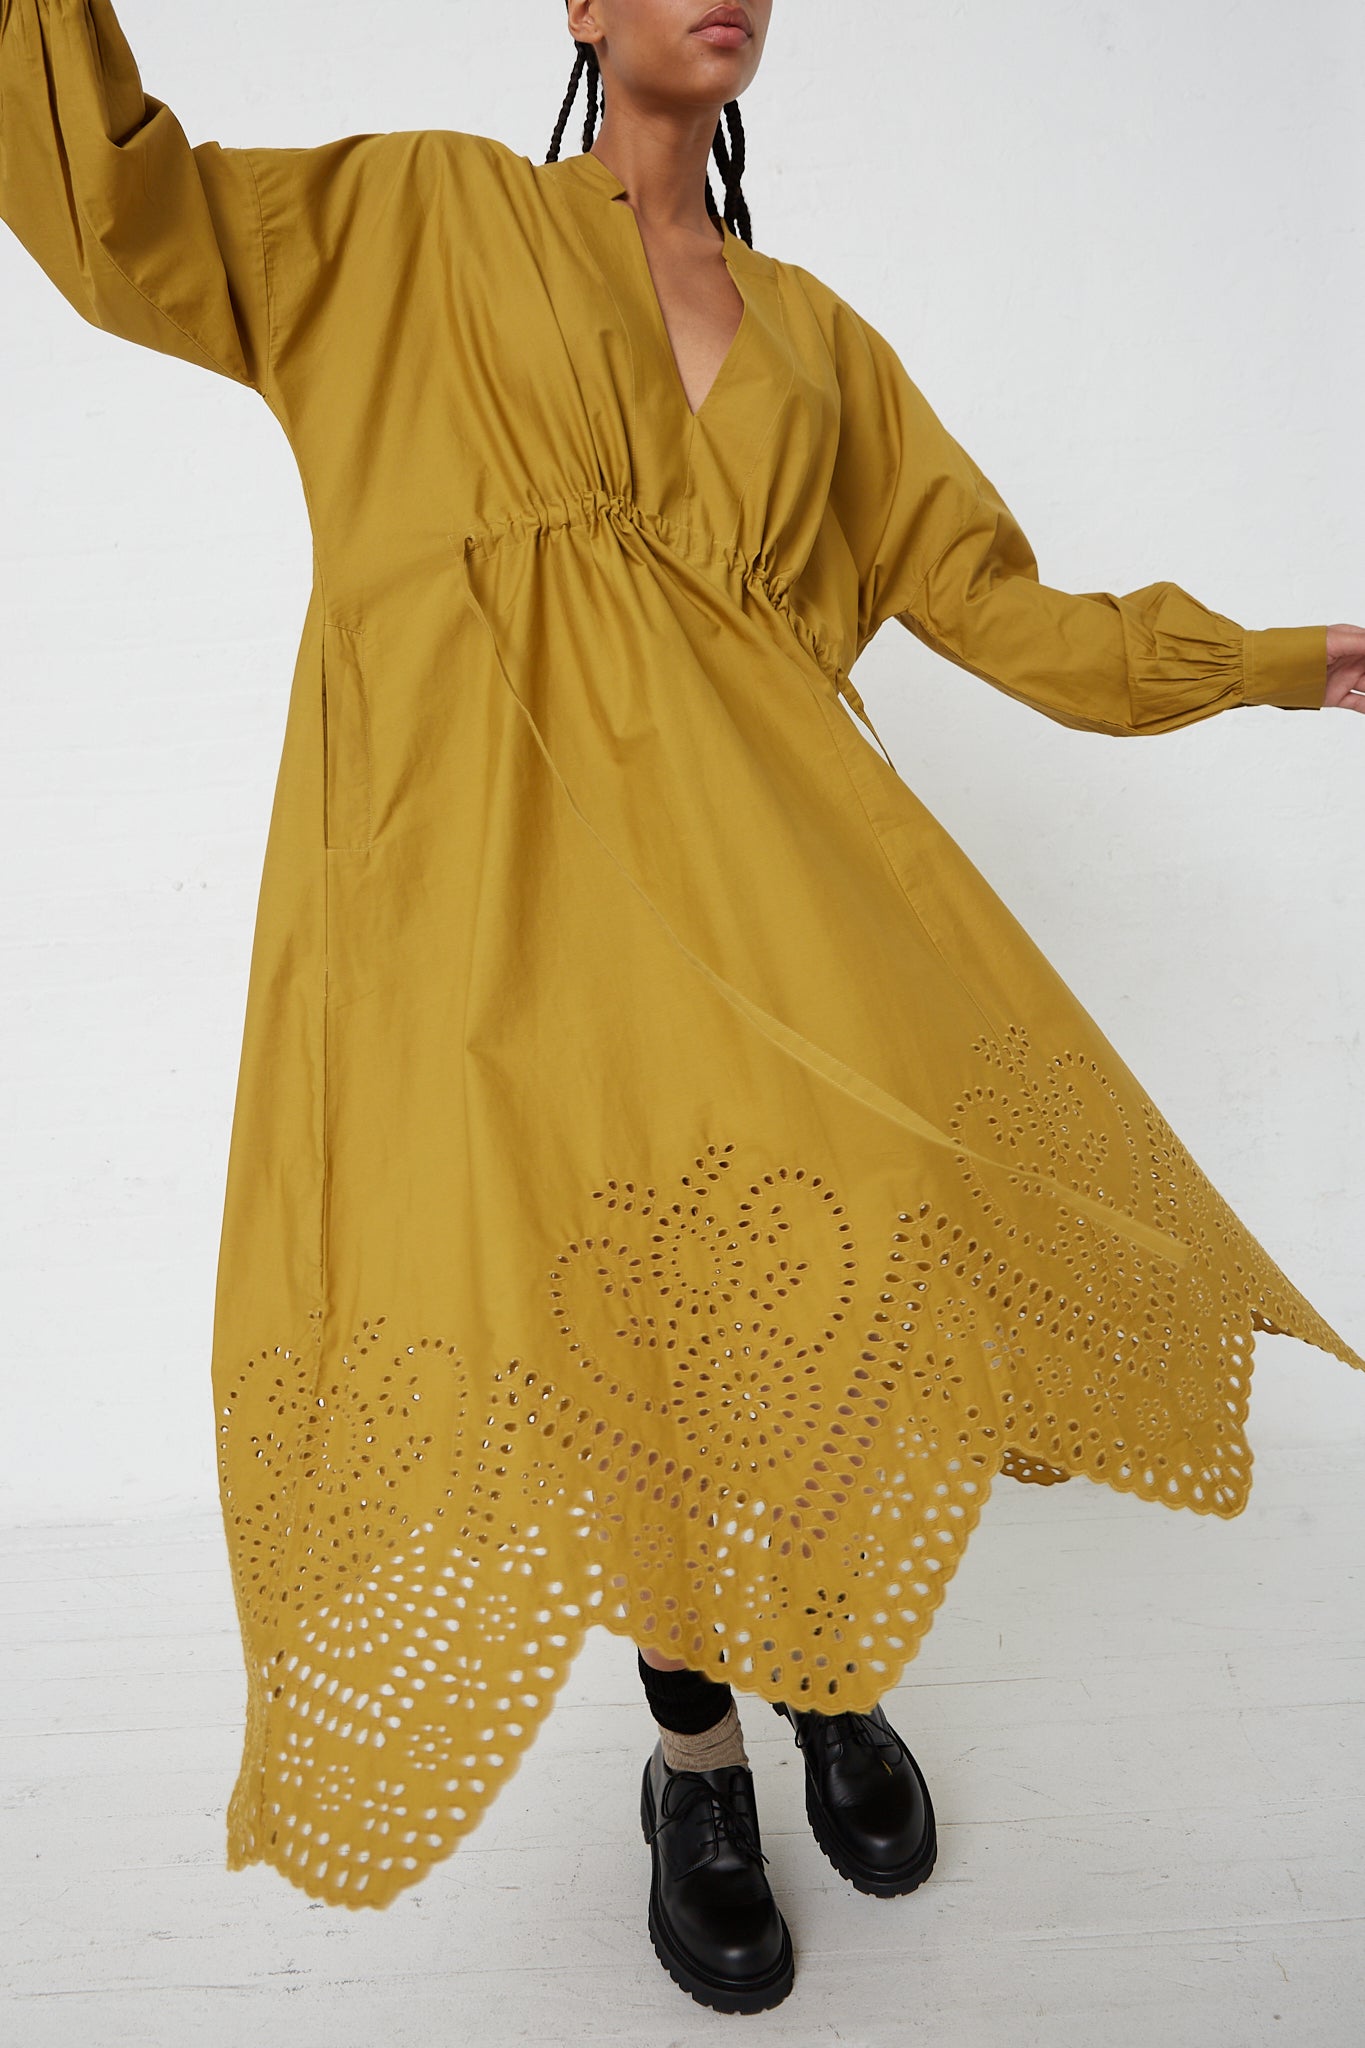 A woman wearing a Rachel Comey Bridge Dress with Hearts Eyelet in Chartreuse with a drawstring tie waist, paired with black boots.